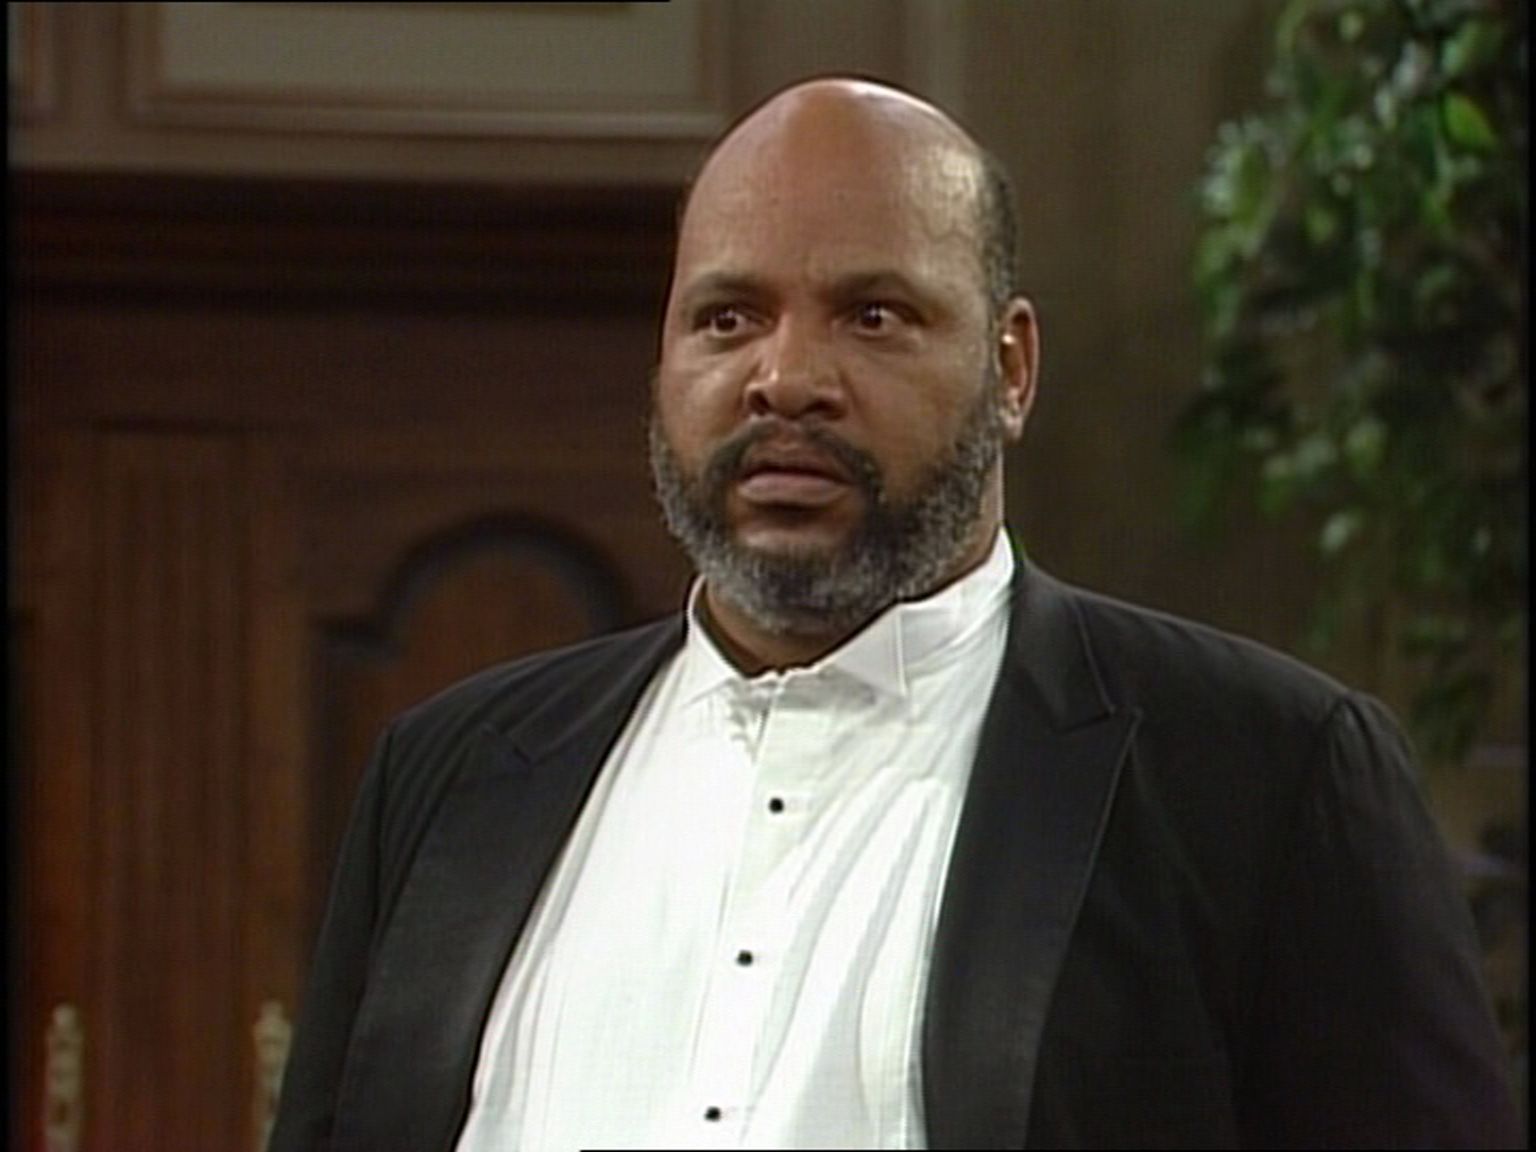 Philip Banks, or Uncle Phil, stares intently off-screen. He has a salt-and-pepper beard and is wearing a black sport coat over a white shirt.